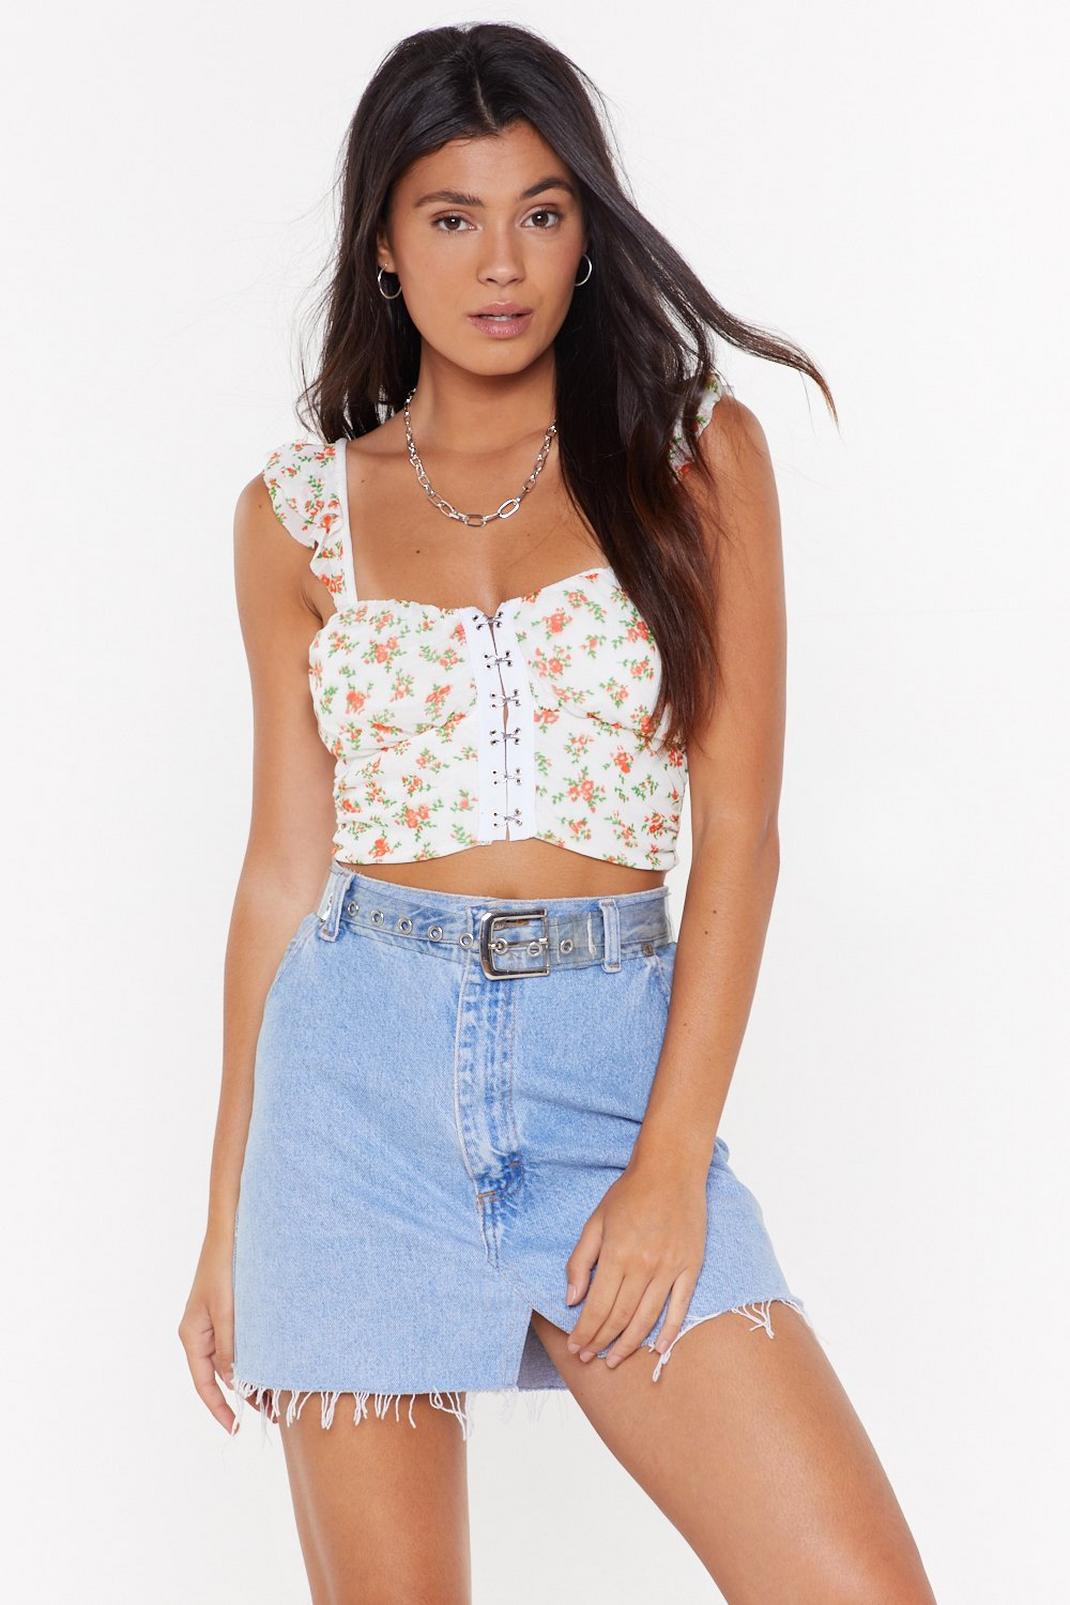 I'm Hooked On a Feeling Floral Crop Top image number 1